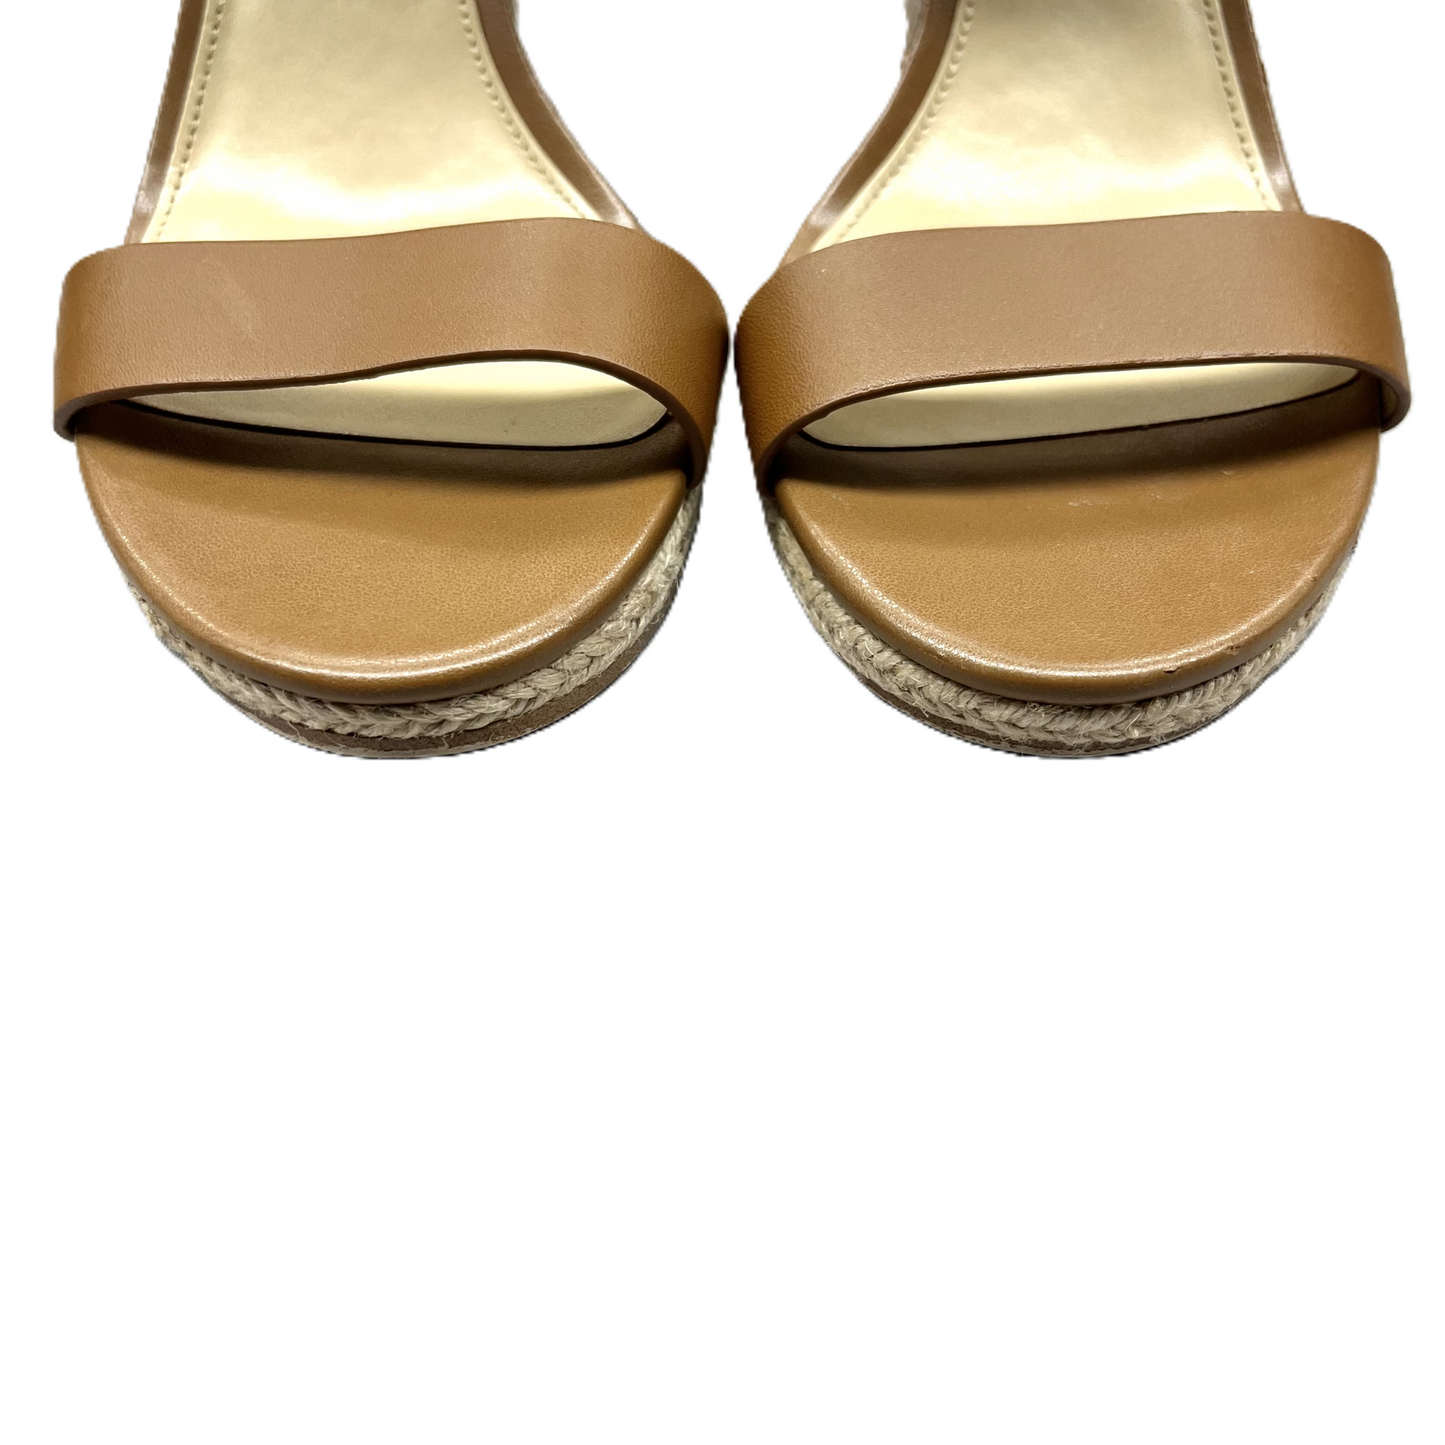 Sandals Heels Wedge By Michael By Michael Kors  Size: 9